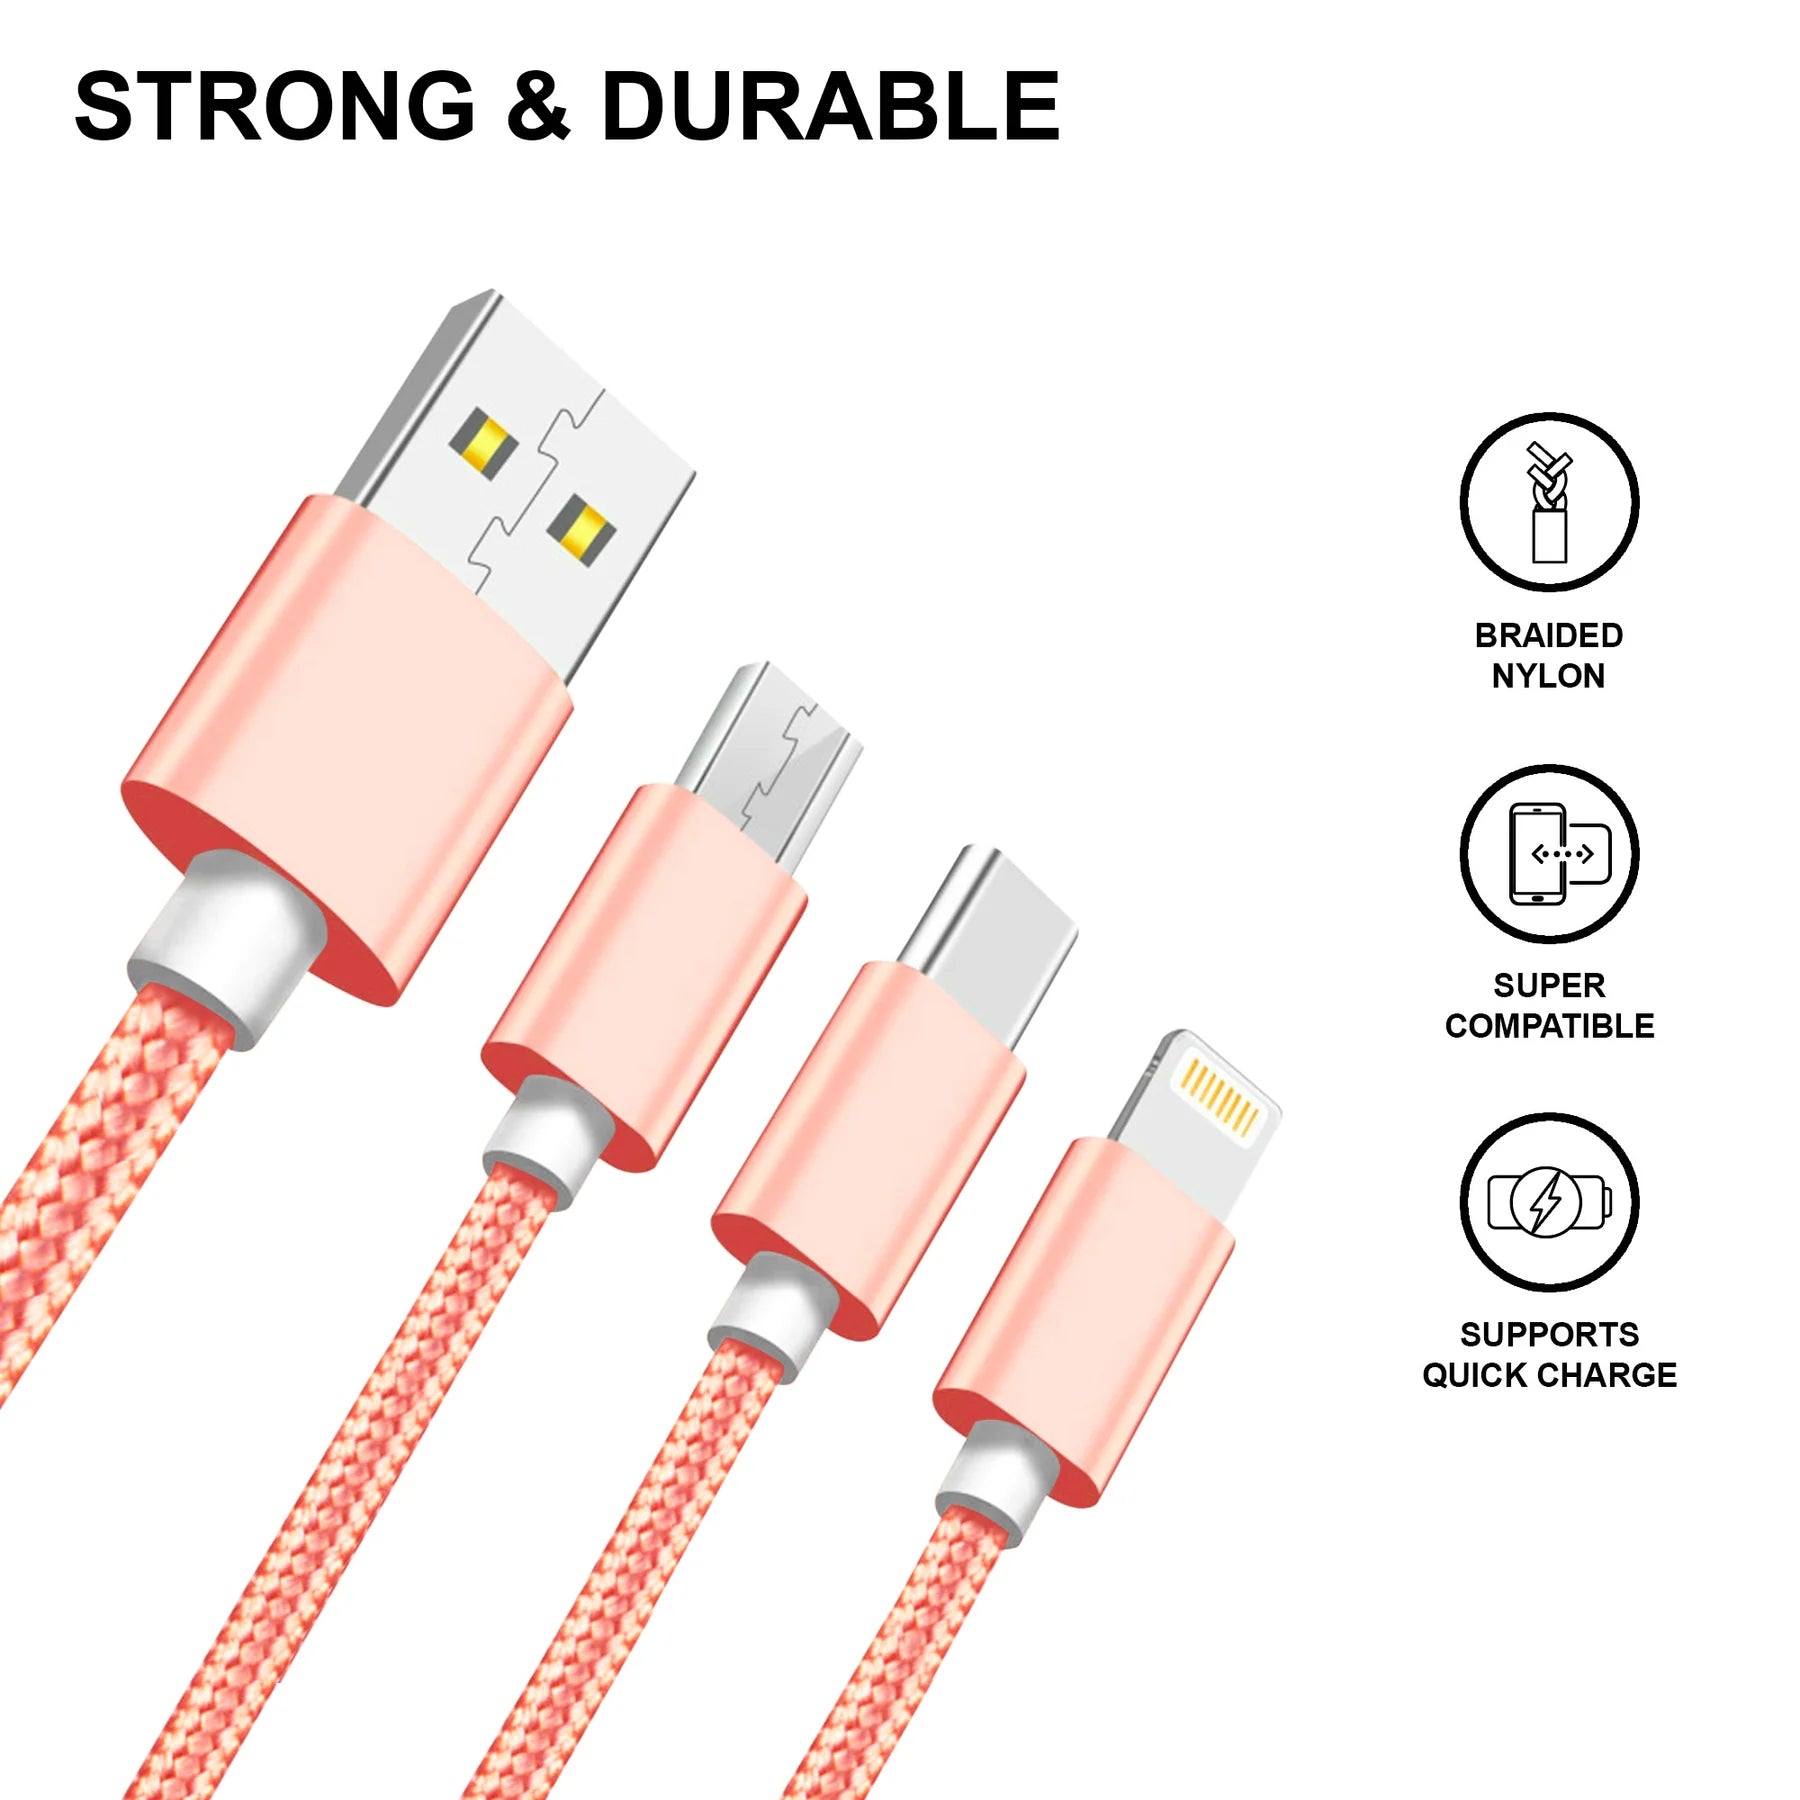 3-in-1 Charging Cable Keychain Rose Gold